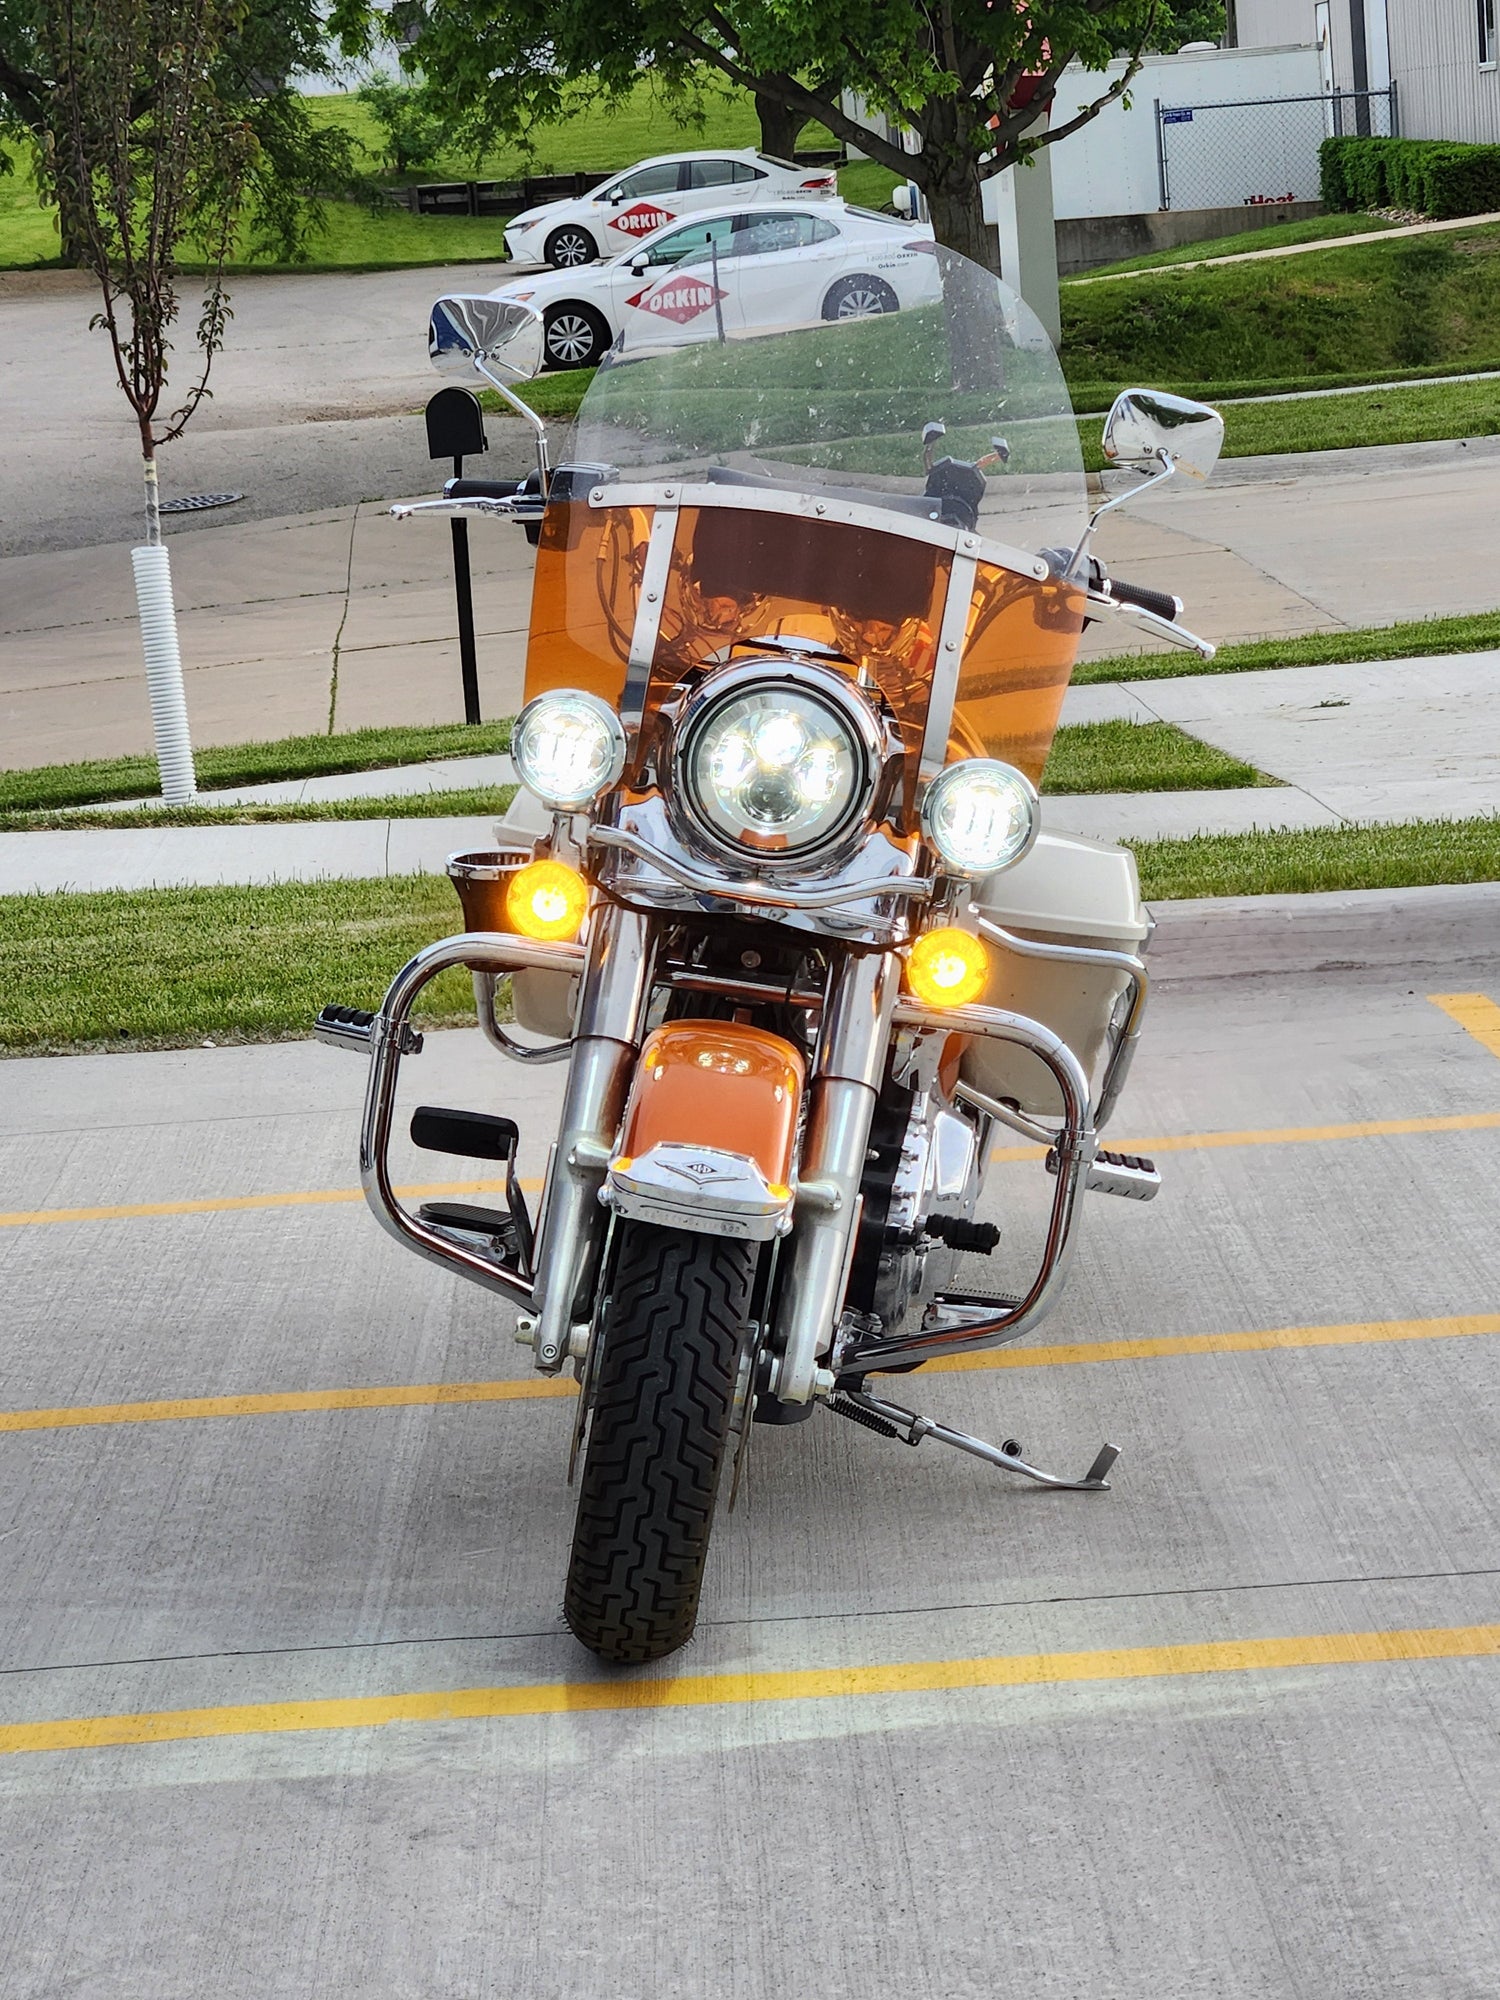 The Benefits of LED Lighting for Motorcycle Safety